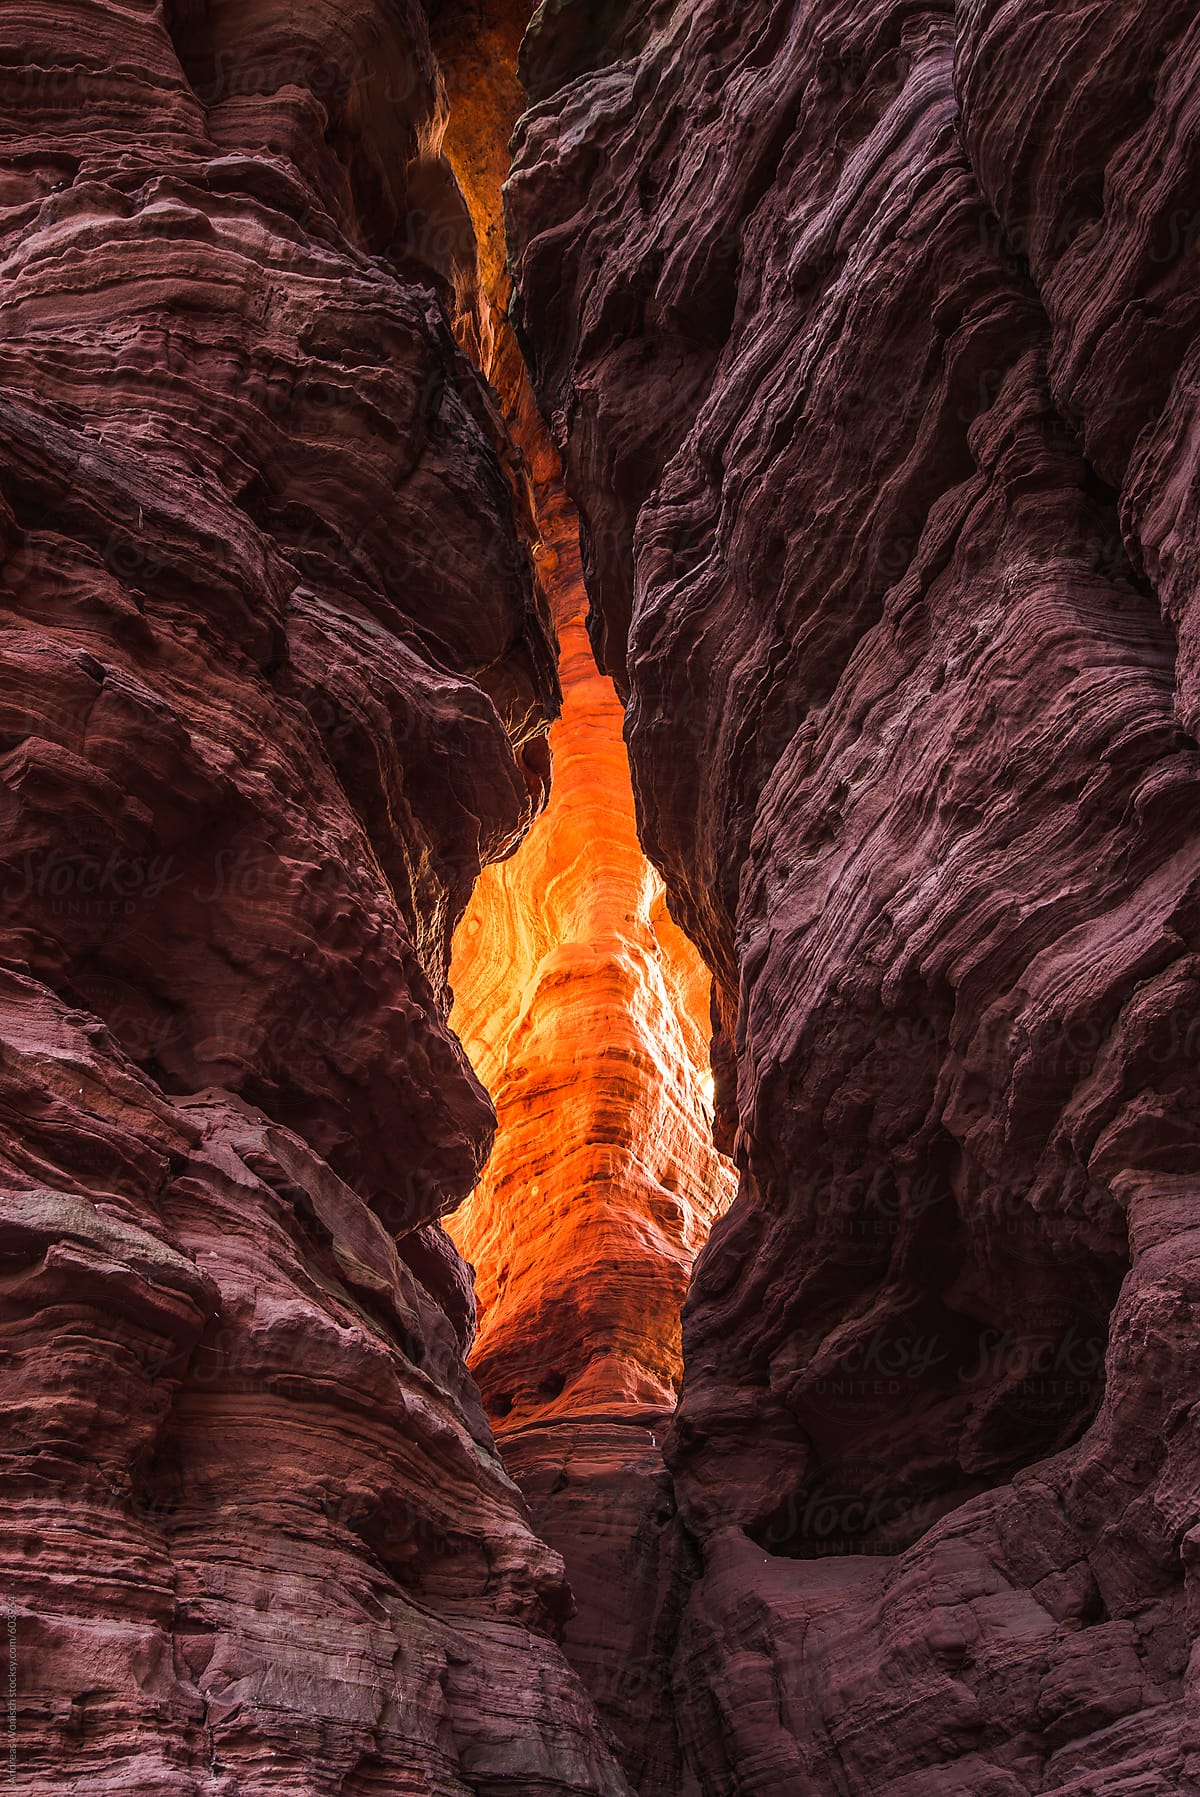 Glowing Sandstone Rock within Crack